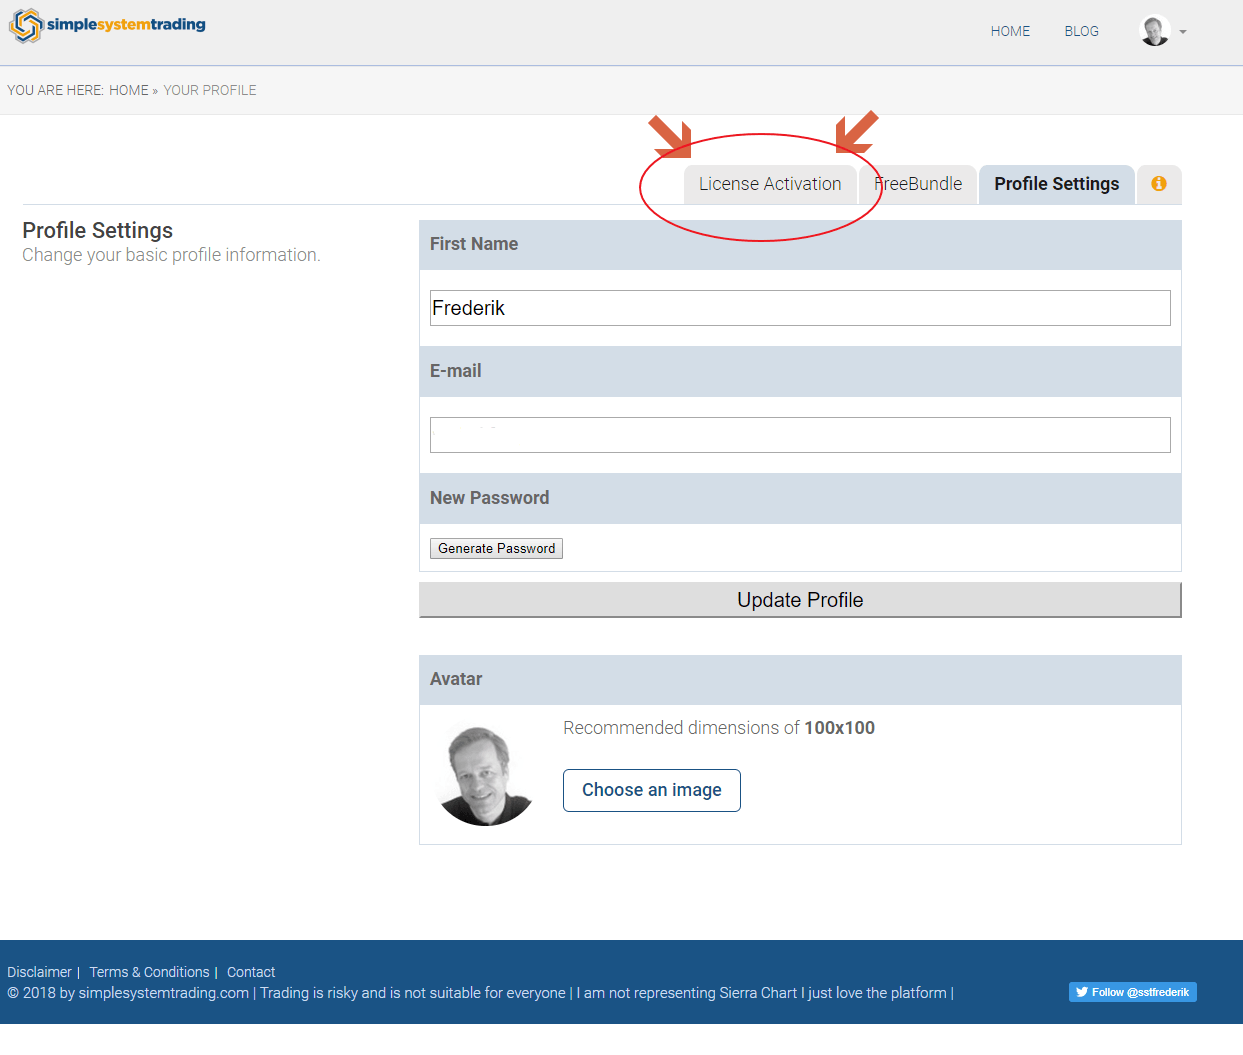 license activation tab